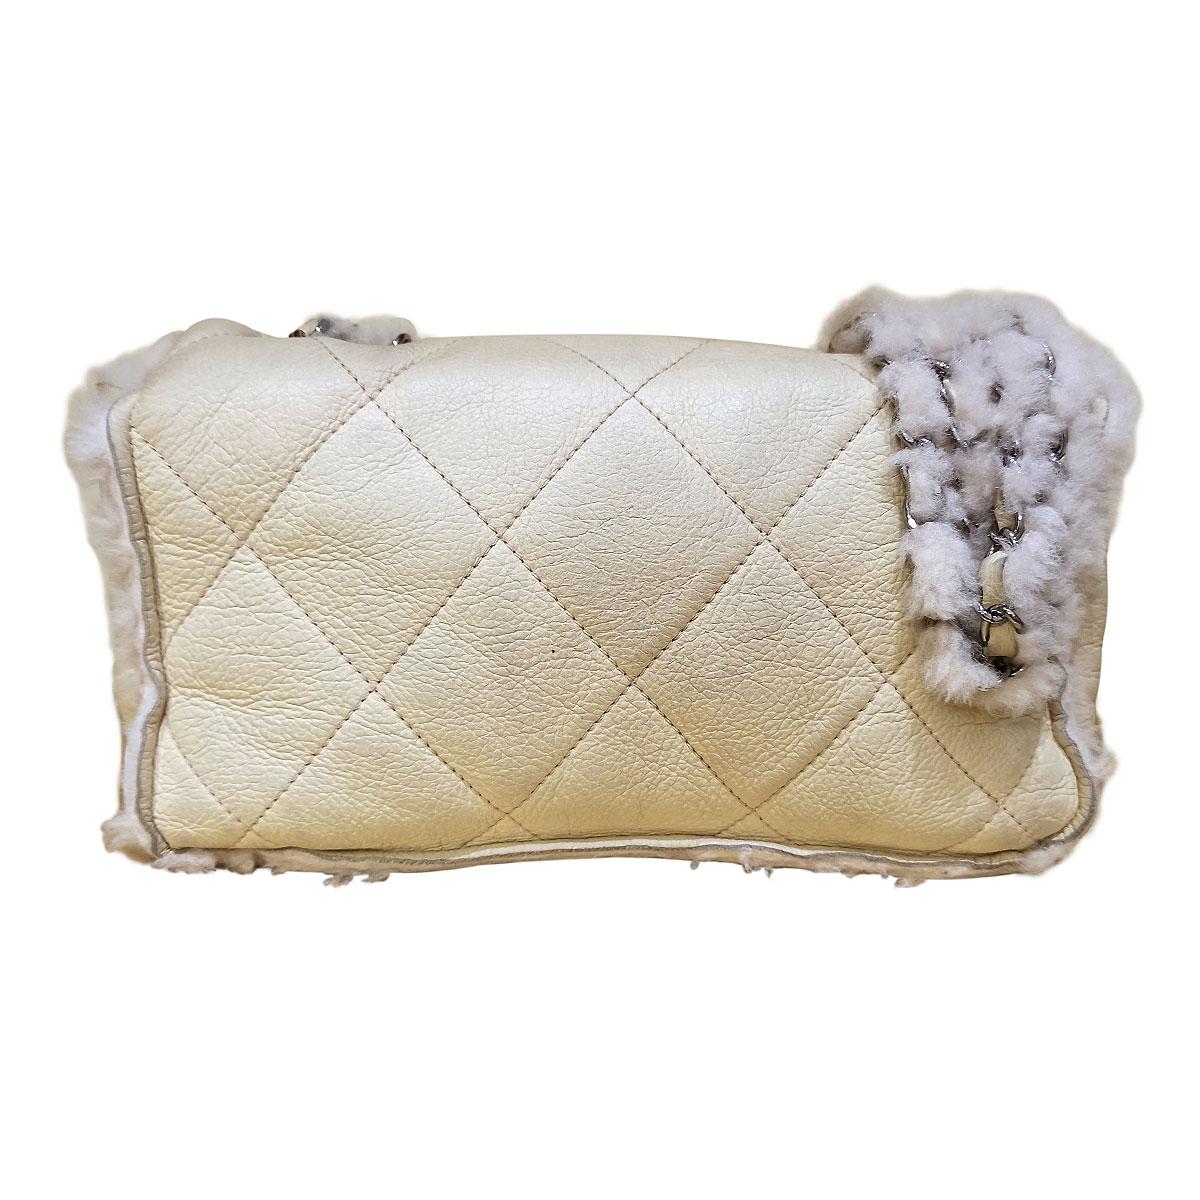 Fantastic and iconic Chanel bag 
Year 2004/2005
Mutton
Beige/cream color
Silver hardware
Worked wool sides
No card
Serial number inside
Cm 25 x 15 x 7 (9.8 x 5.9 x 2.75 inches)
With dustbag 
Worldwide express shipping included in the price !